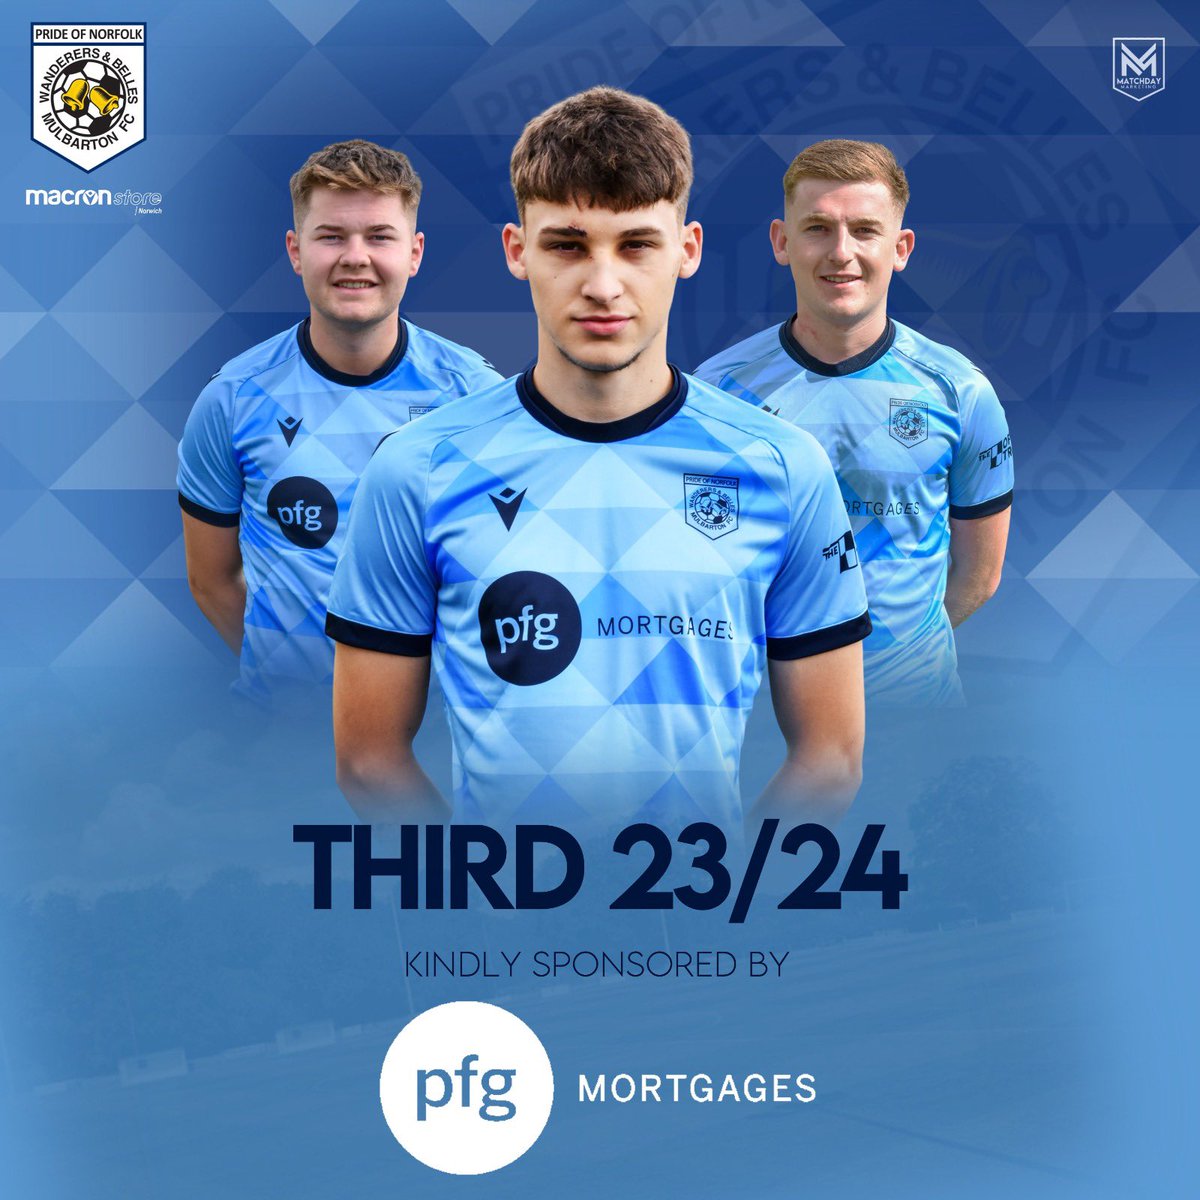 🔥𝐓𝐇𝐄 𝐁𝐈𝐆 𝐑𝐄𝐕𝐄𝐀𝐋🔥 Unveiling our brand new third kit for the upcoming 2023/24 season.   Very kindly sponsored by 🩵 @PremierFG 🩵 The lads will wear this stunning new kit this evening when we welcome @The_Yachtsman #MWFC